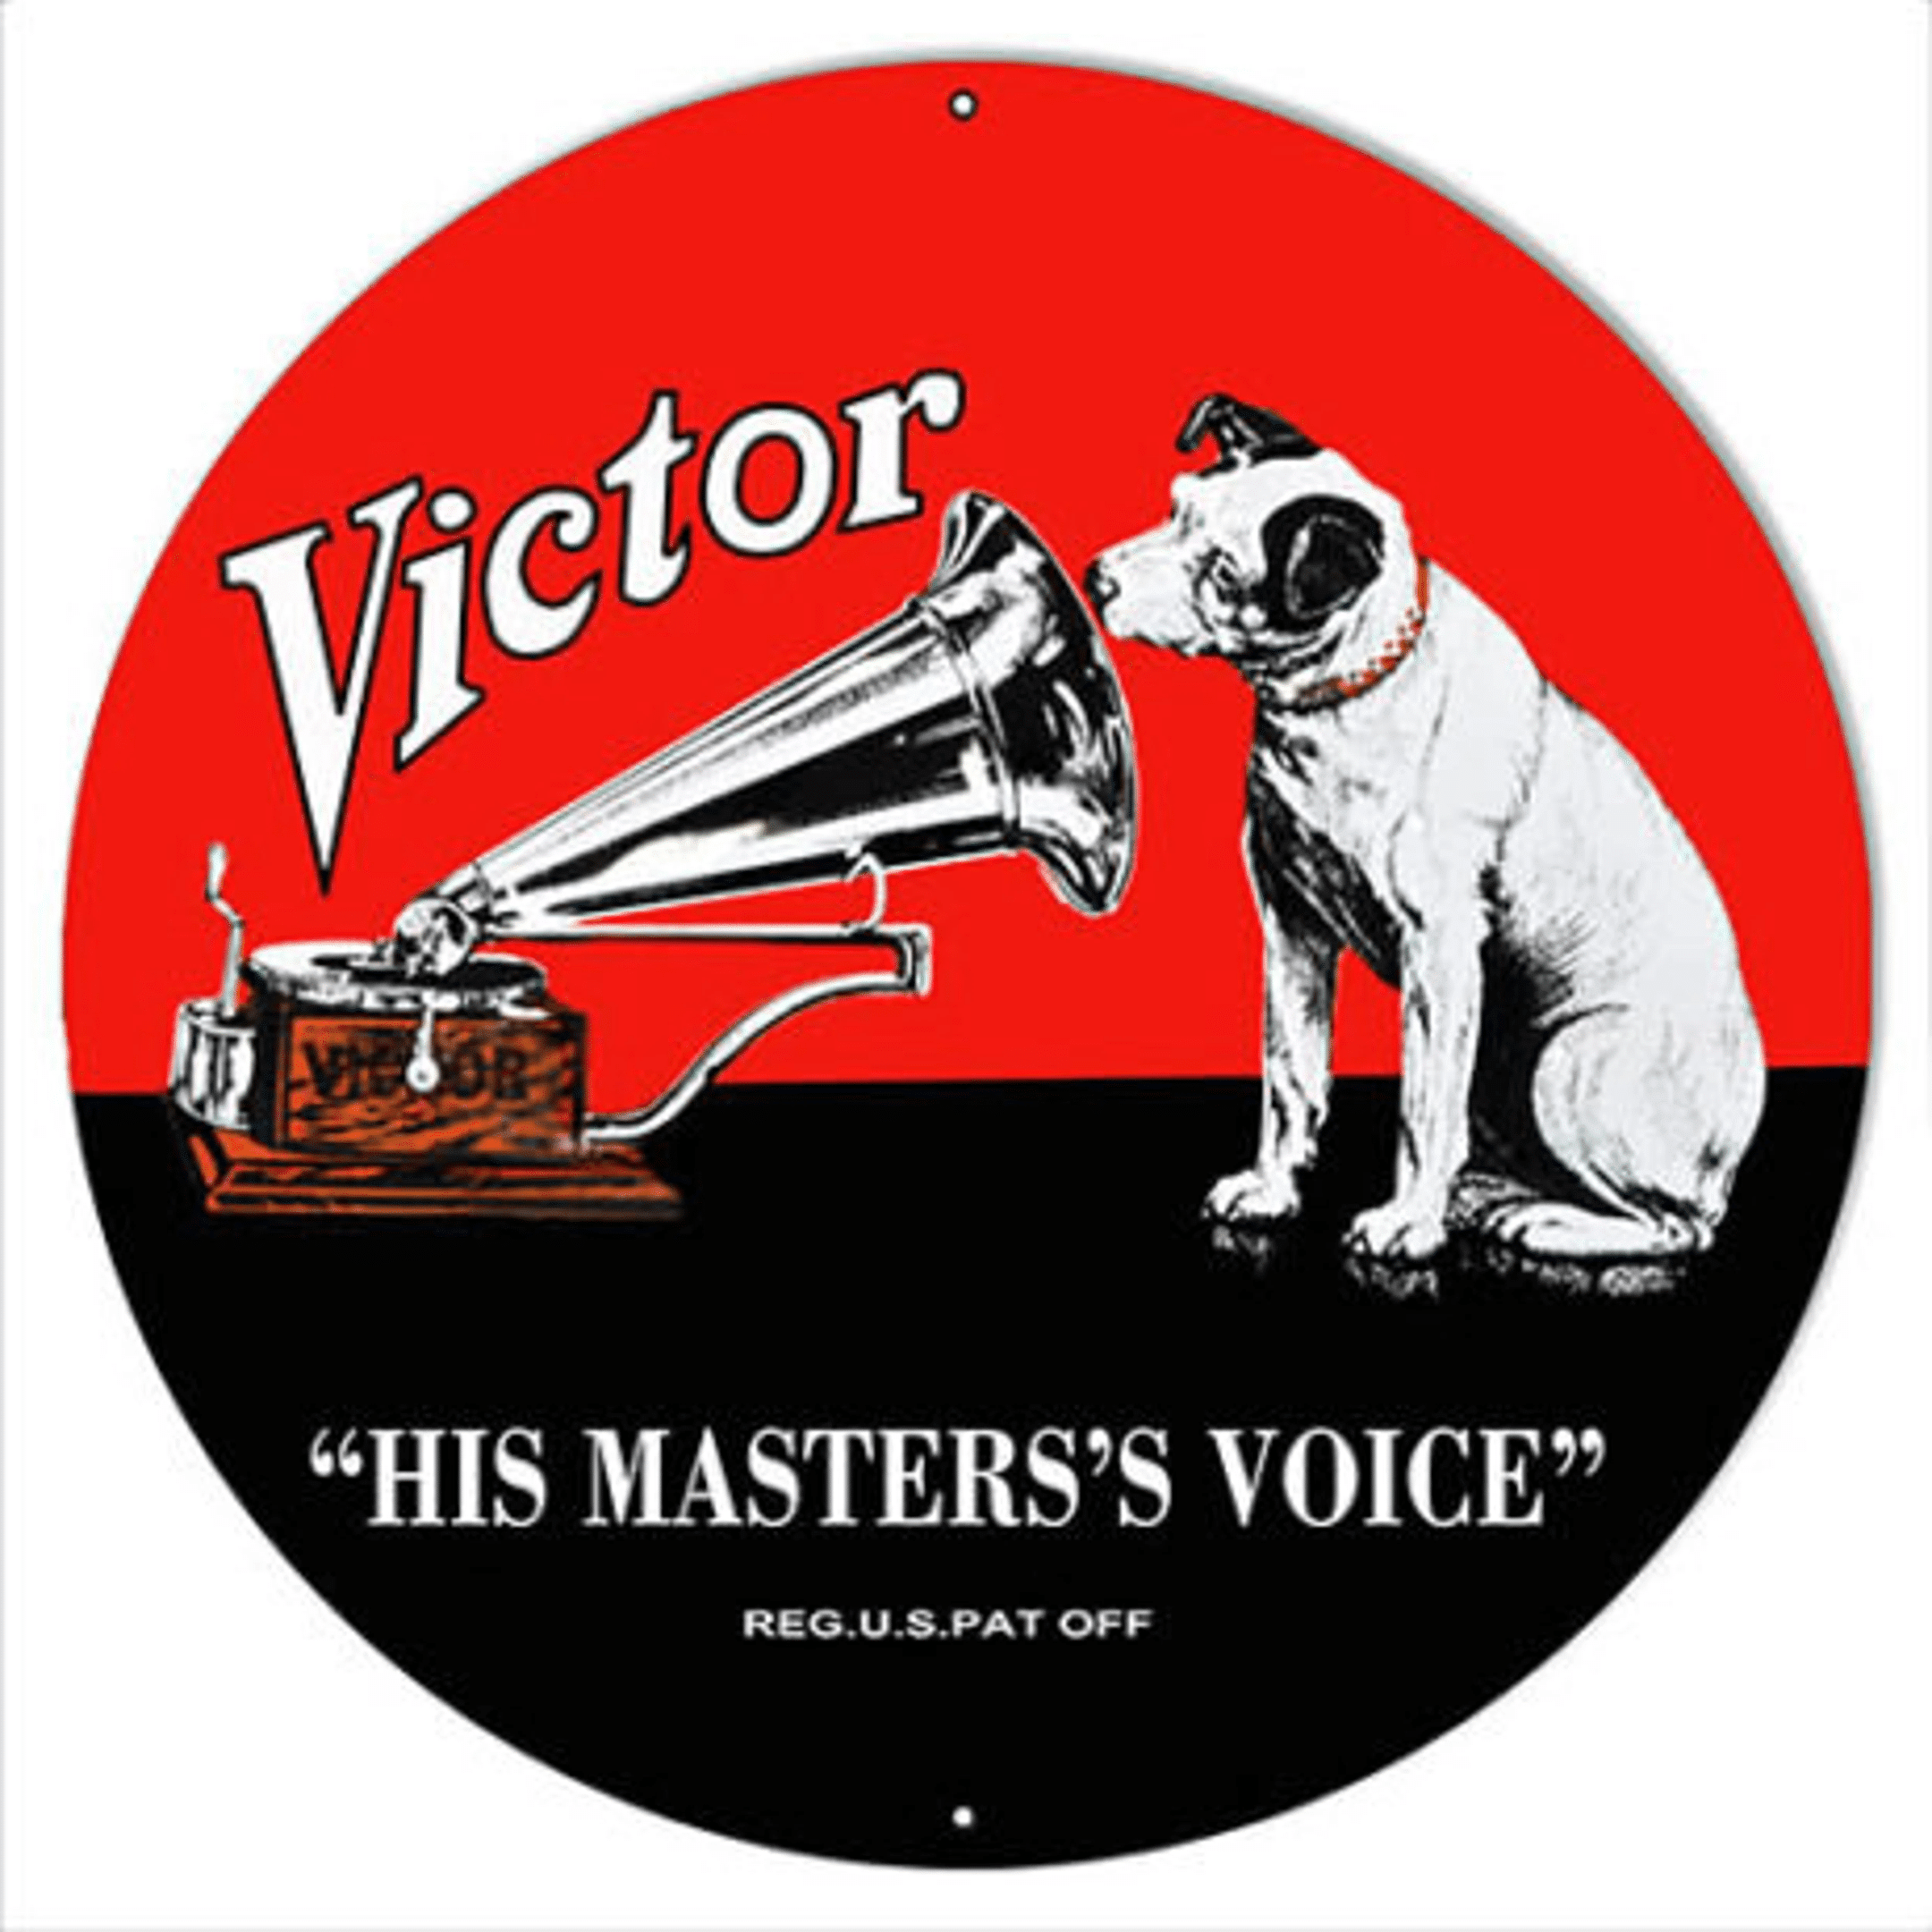 Victor Phonographs His Masters Voice Metal Sign 4 Sizes Aged OR New Style vintage style retro country advertising art wall decor RG